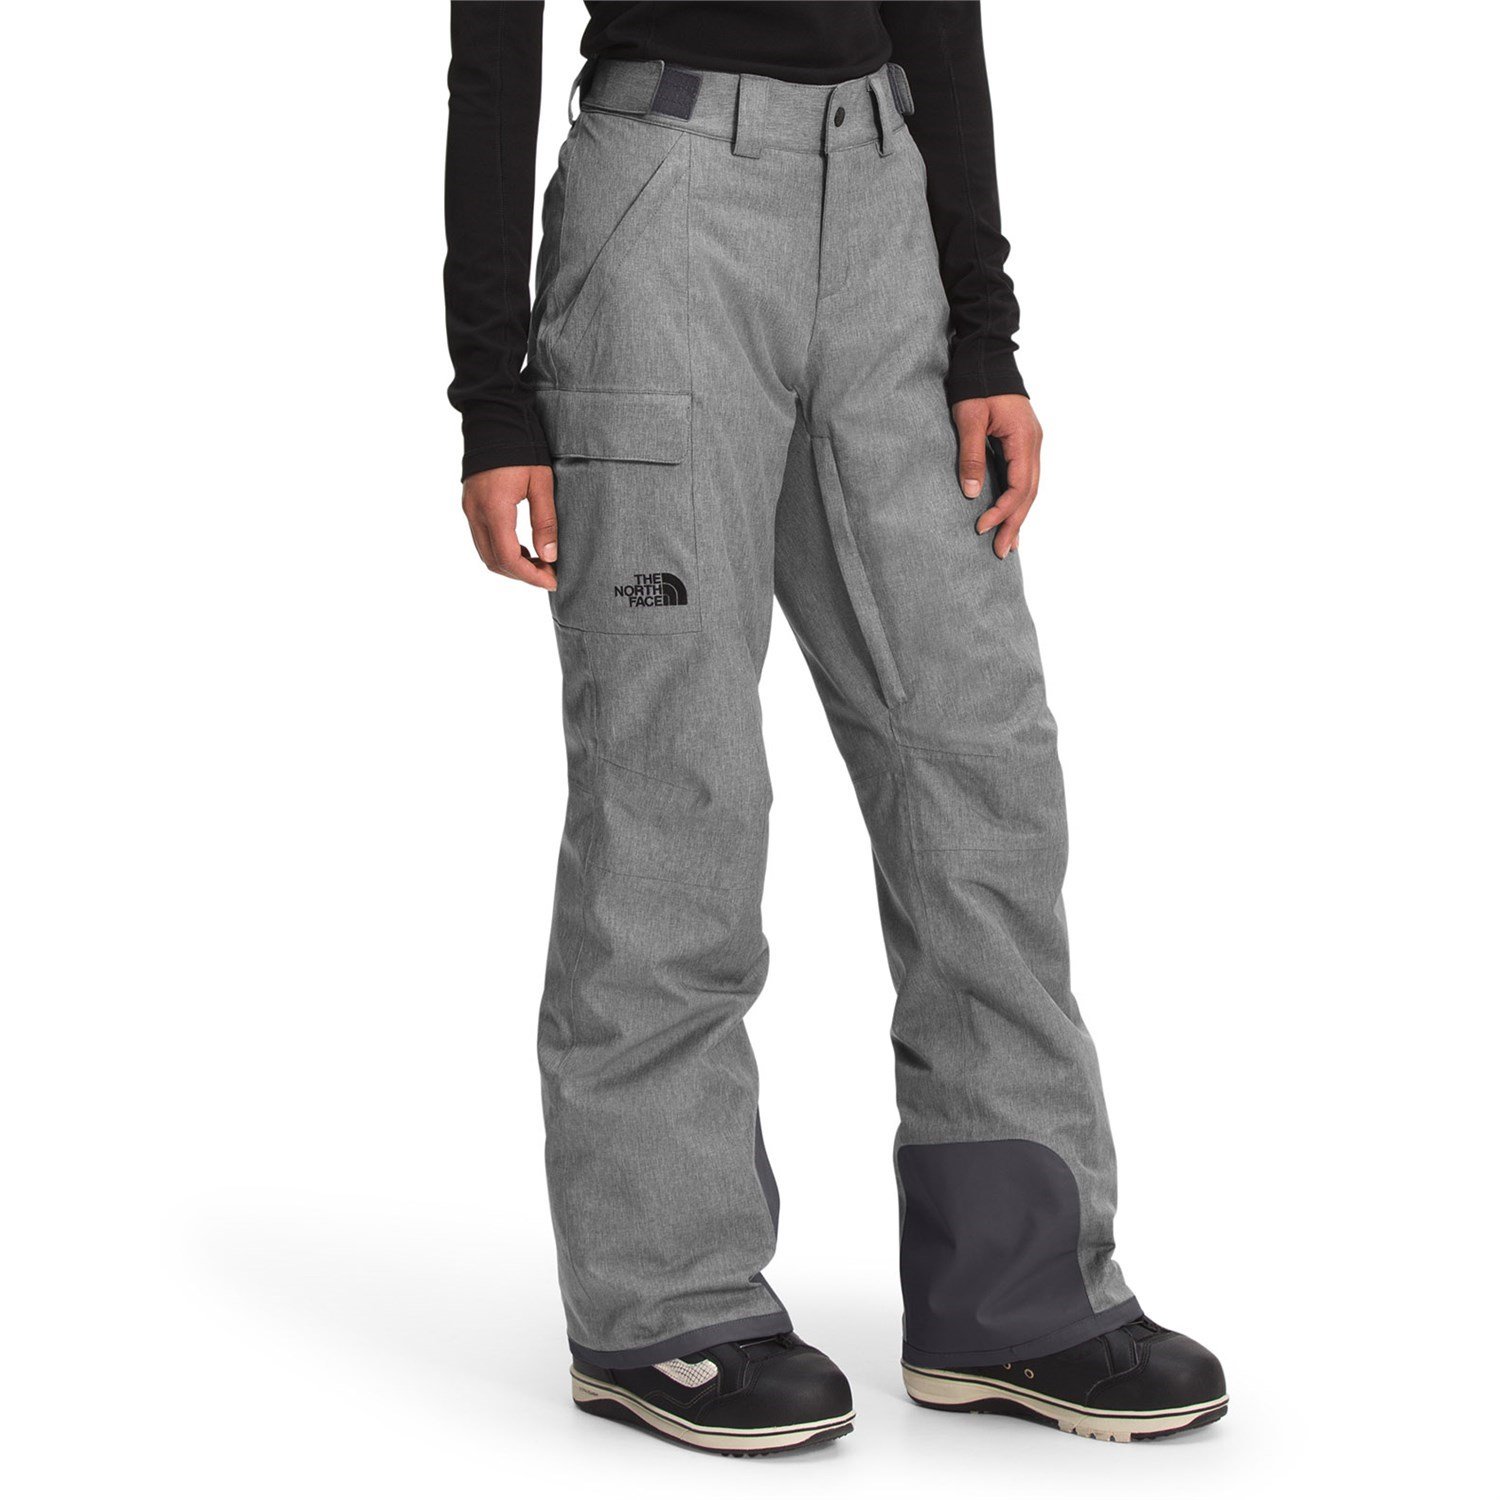 https://images.evo.com/imgp/zoom/203132/858643/the-north-face-freedom-insulated-tall-pants-women-s-.jpg